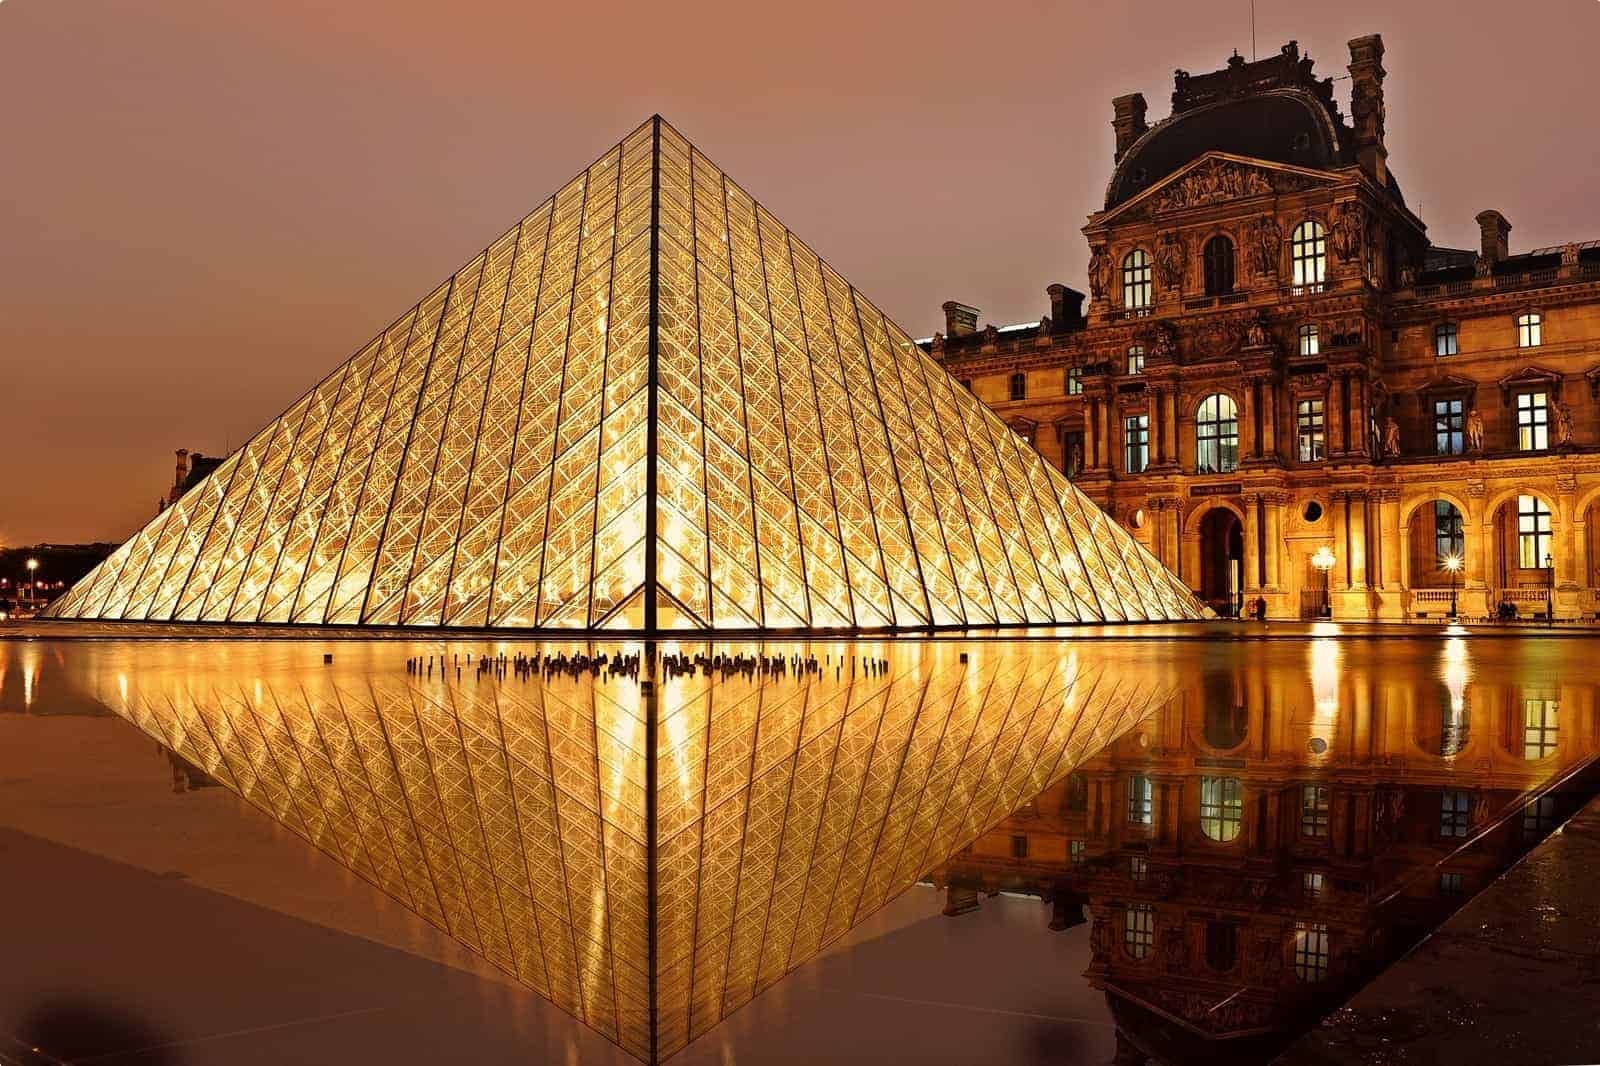 The Louvre Palace and the Pyramid